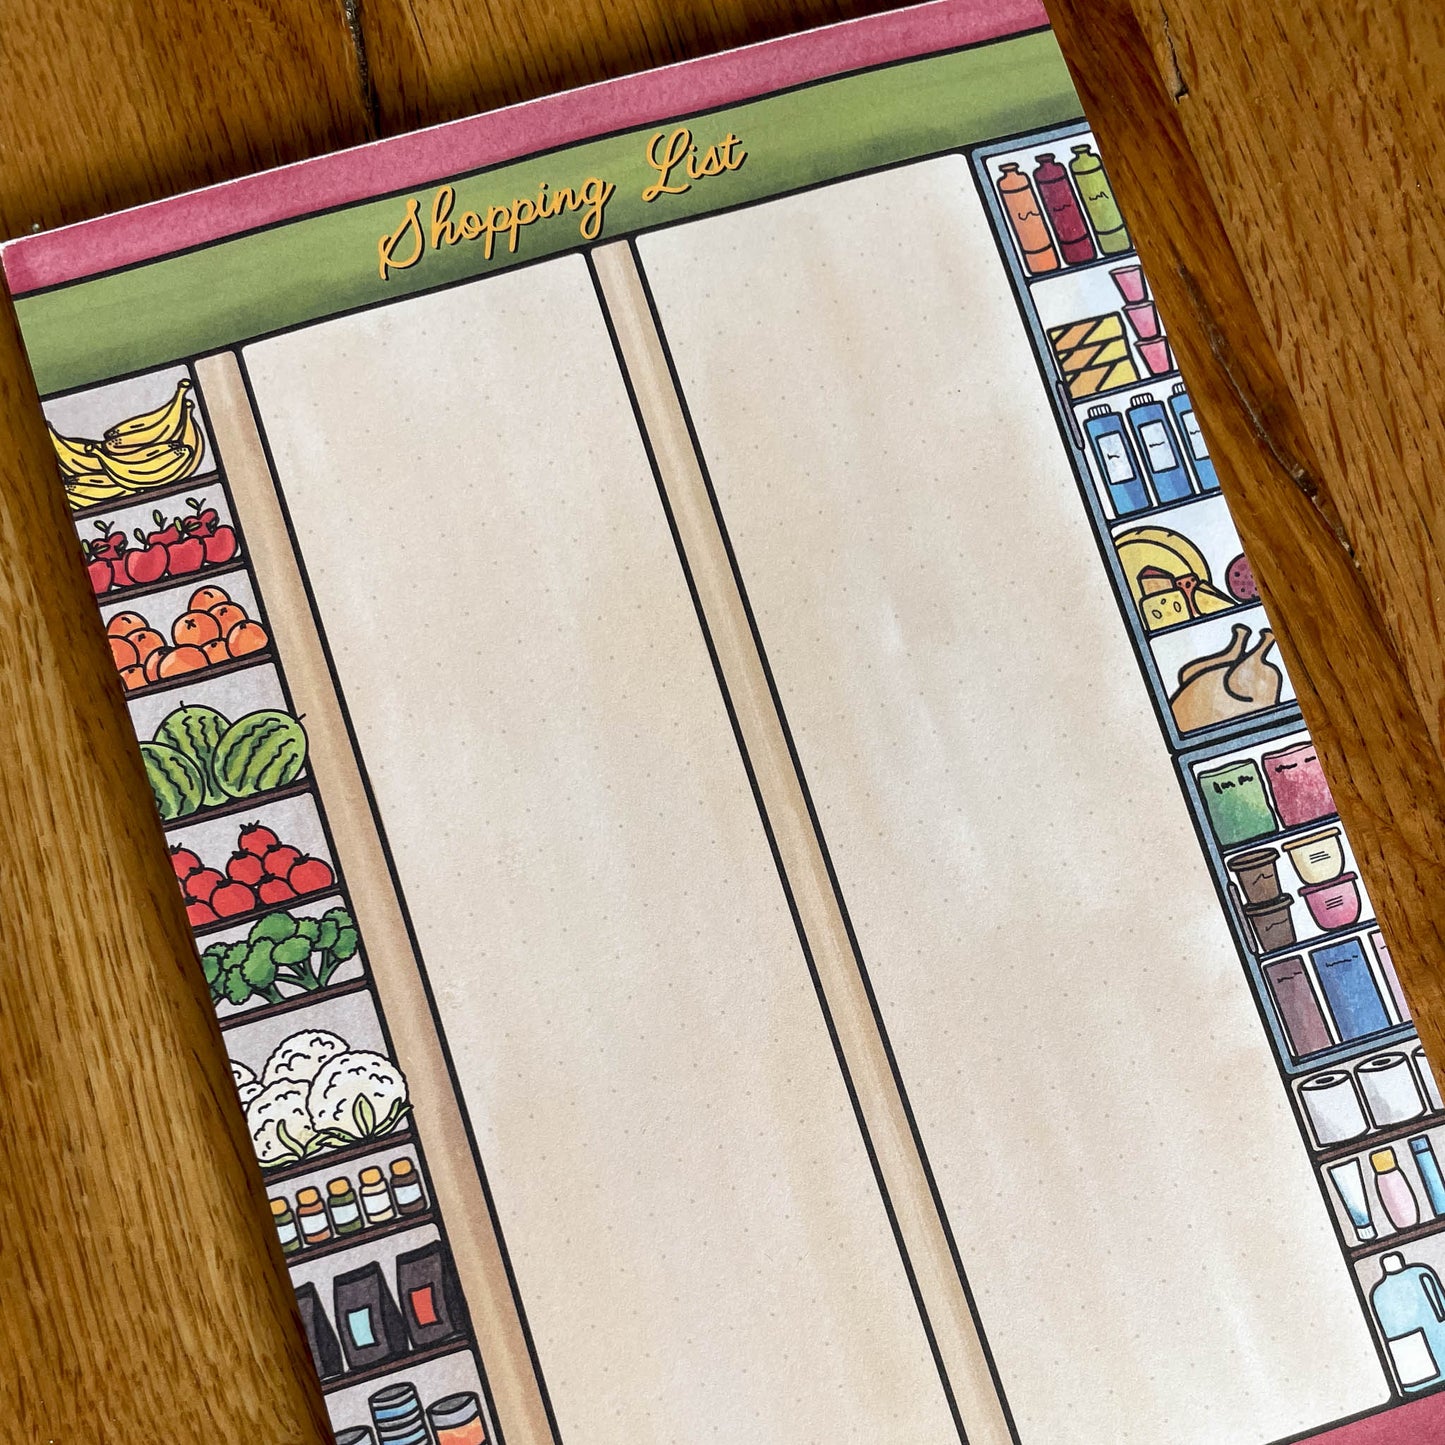 A5 Grocery List Organizer - Take the stress out of shopping with this cleverly designed notepad that helps you prioritize and streamline your grocery list.